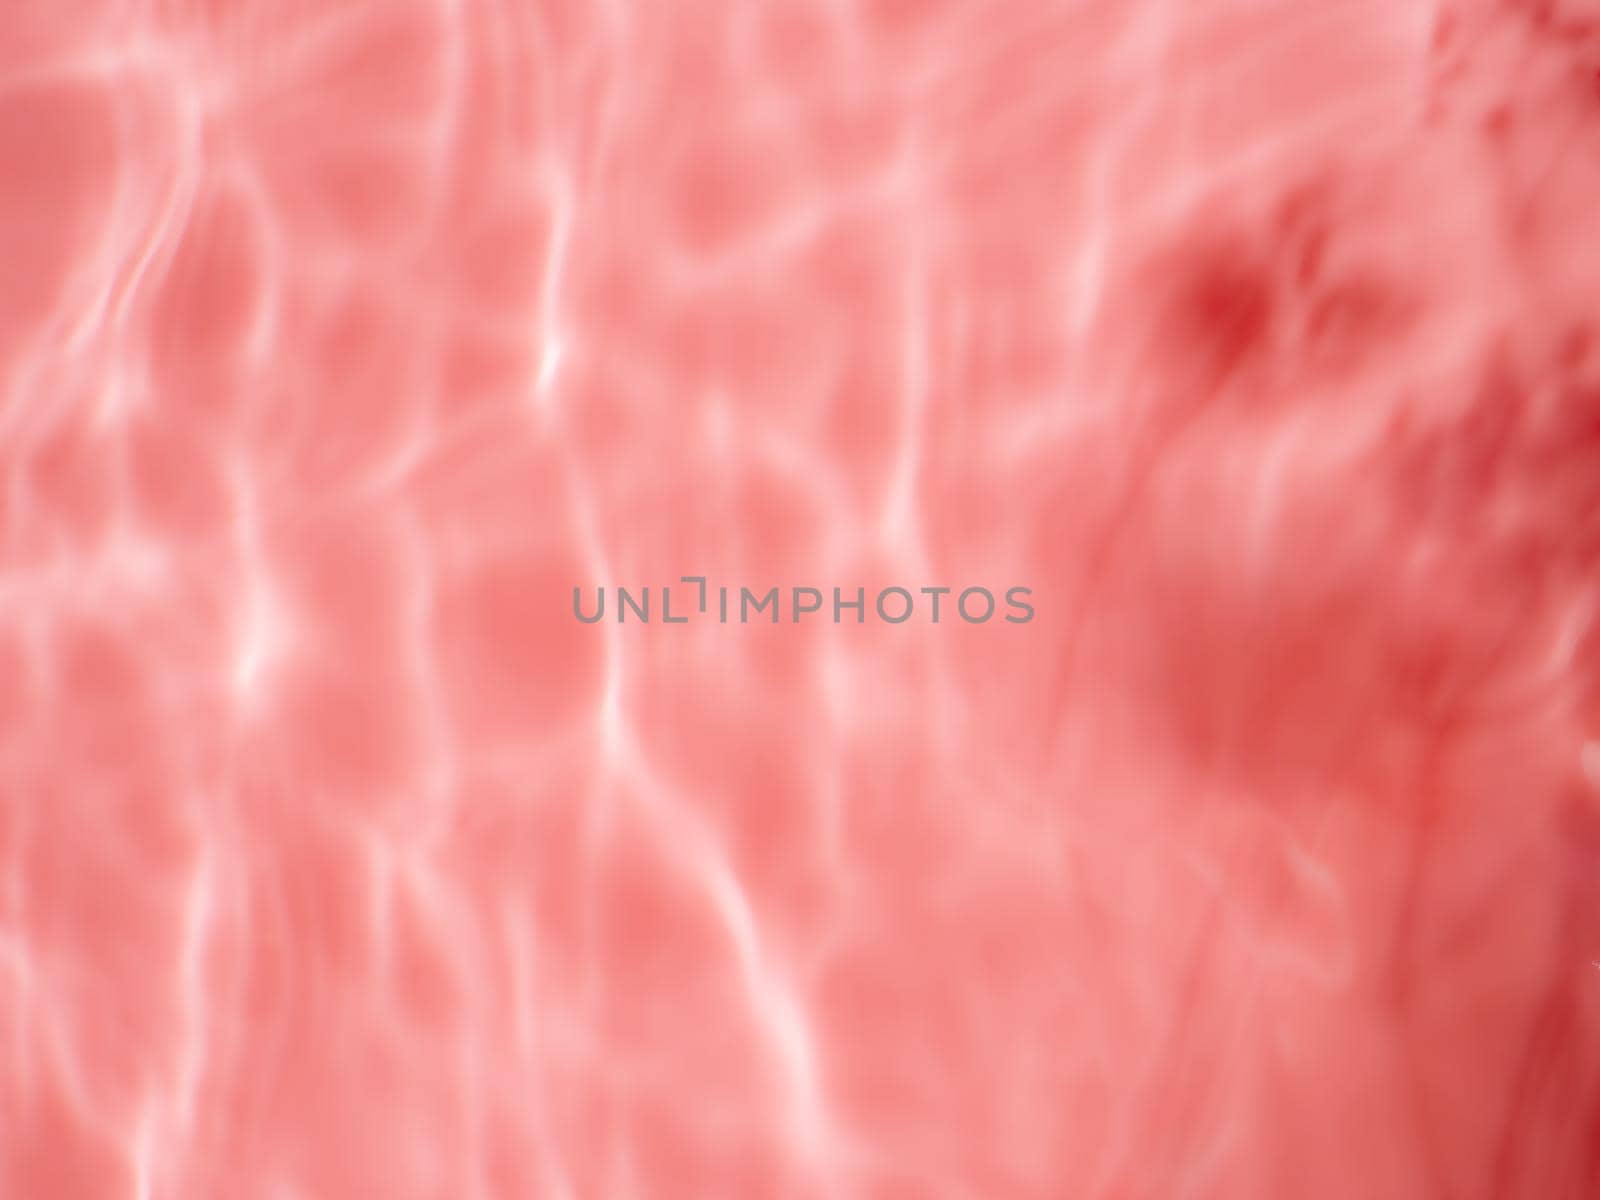 Ripple water texture with foliage shadows on pink by fascinadora